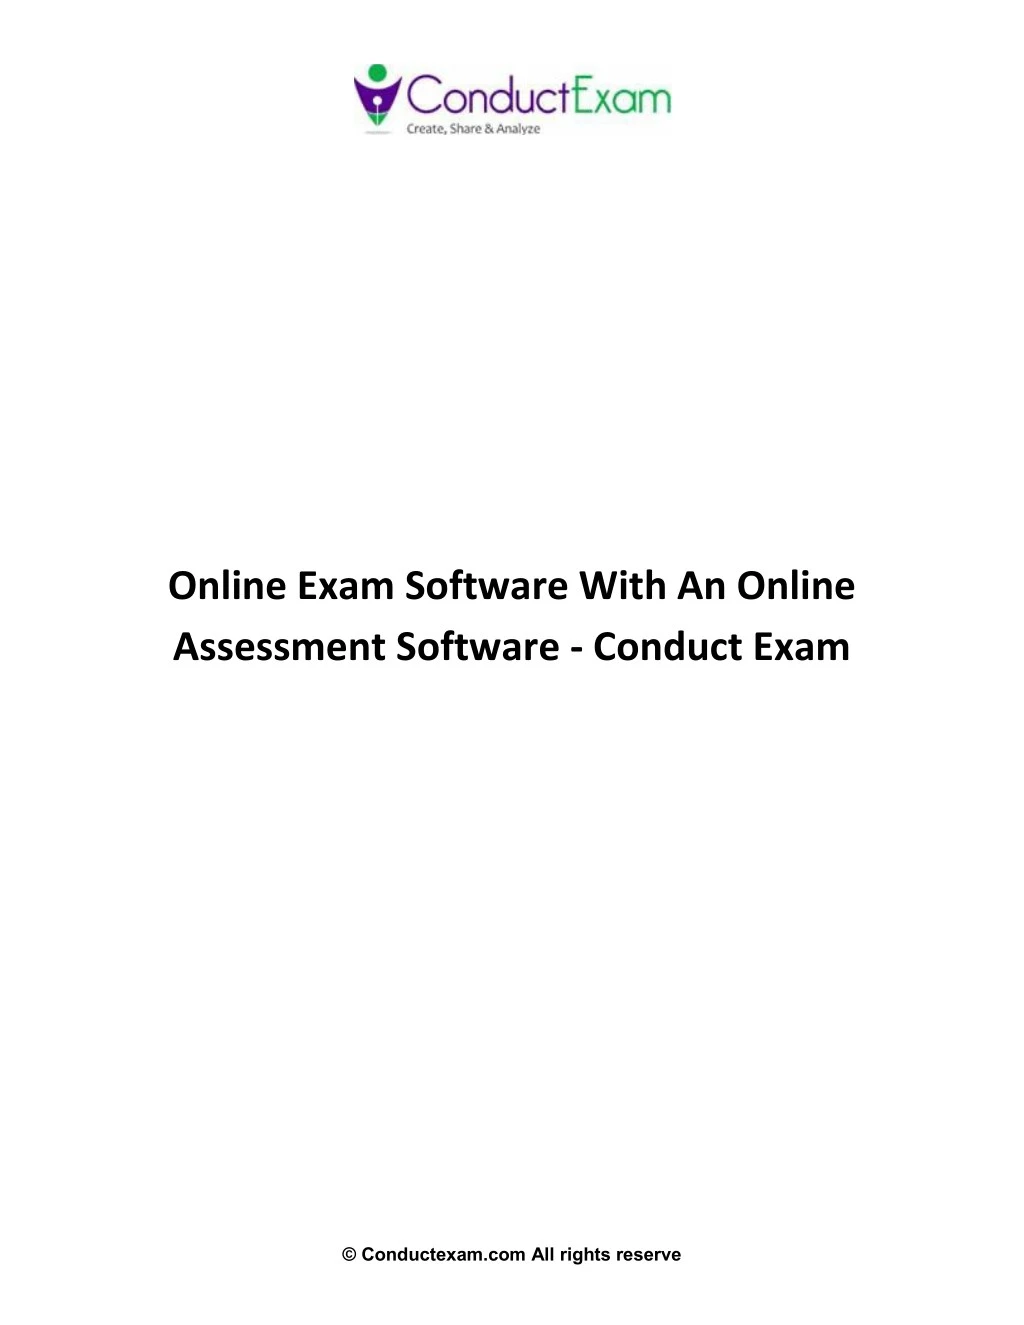 online exam software with an online assessment